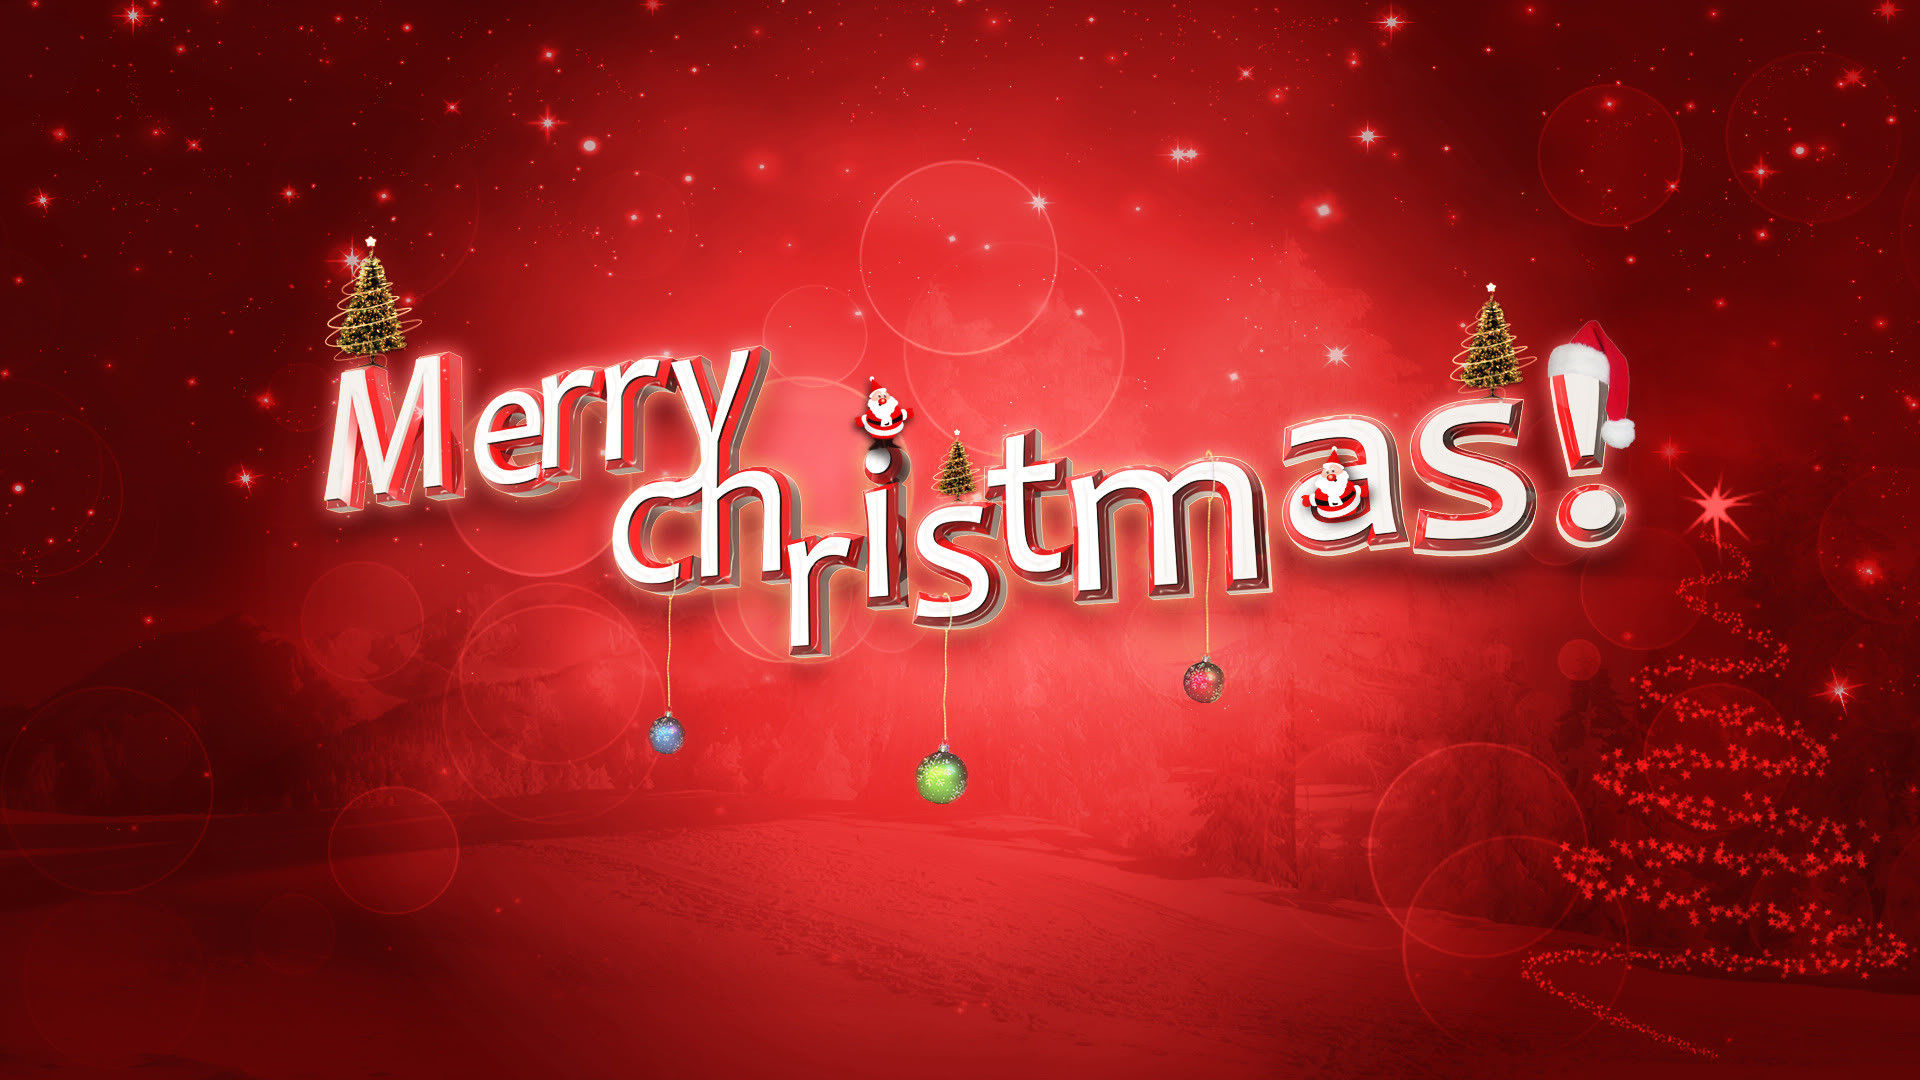 1920x1080 Advance Merry Christmas Wallpapers